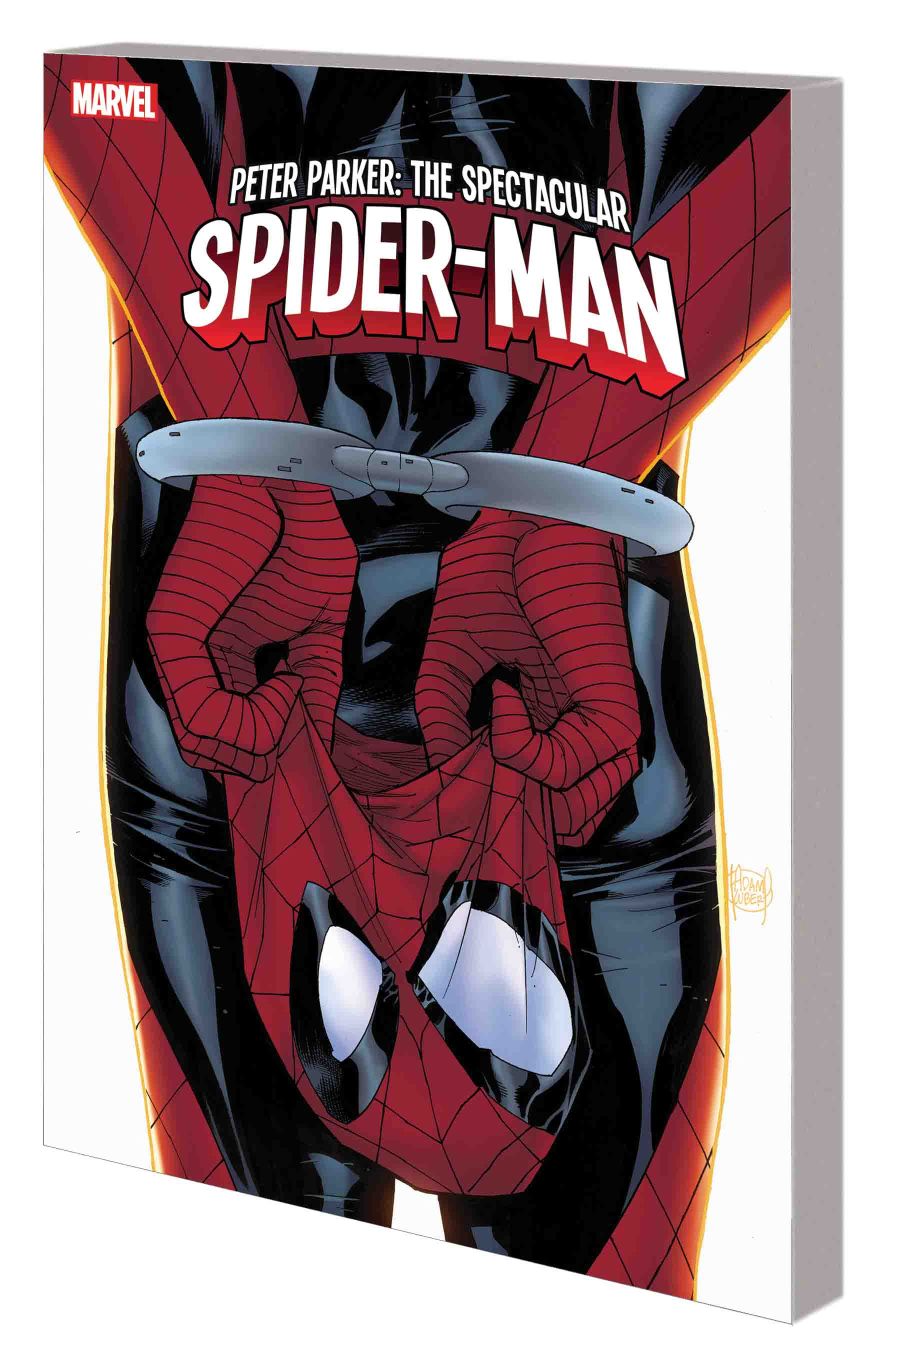 PETER PARKER: THE SPECTACULAR SPIDER-MAN VOL. 2 - MOST WANTED TPB